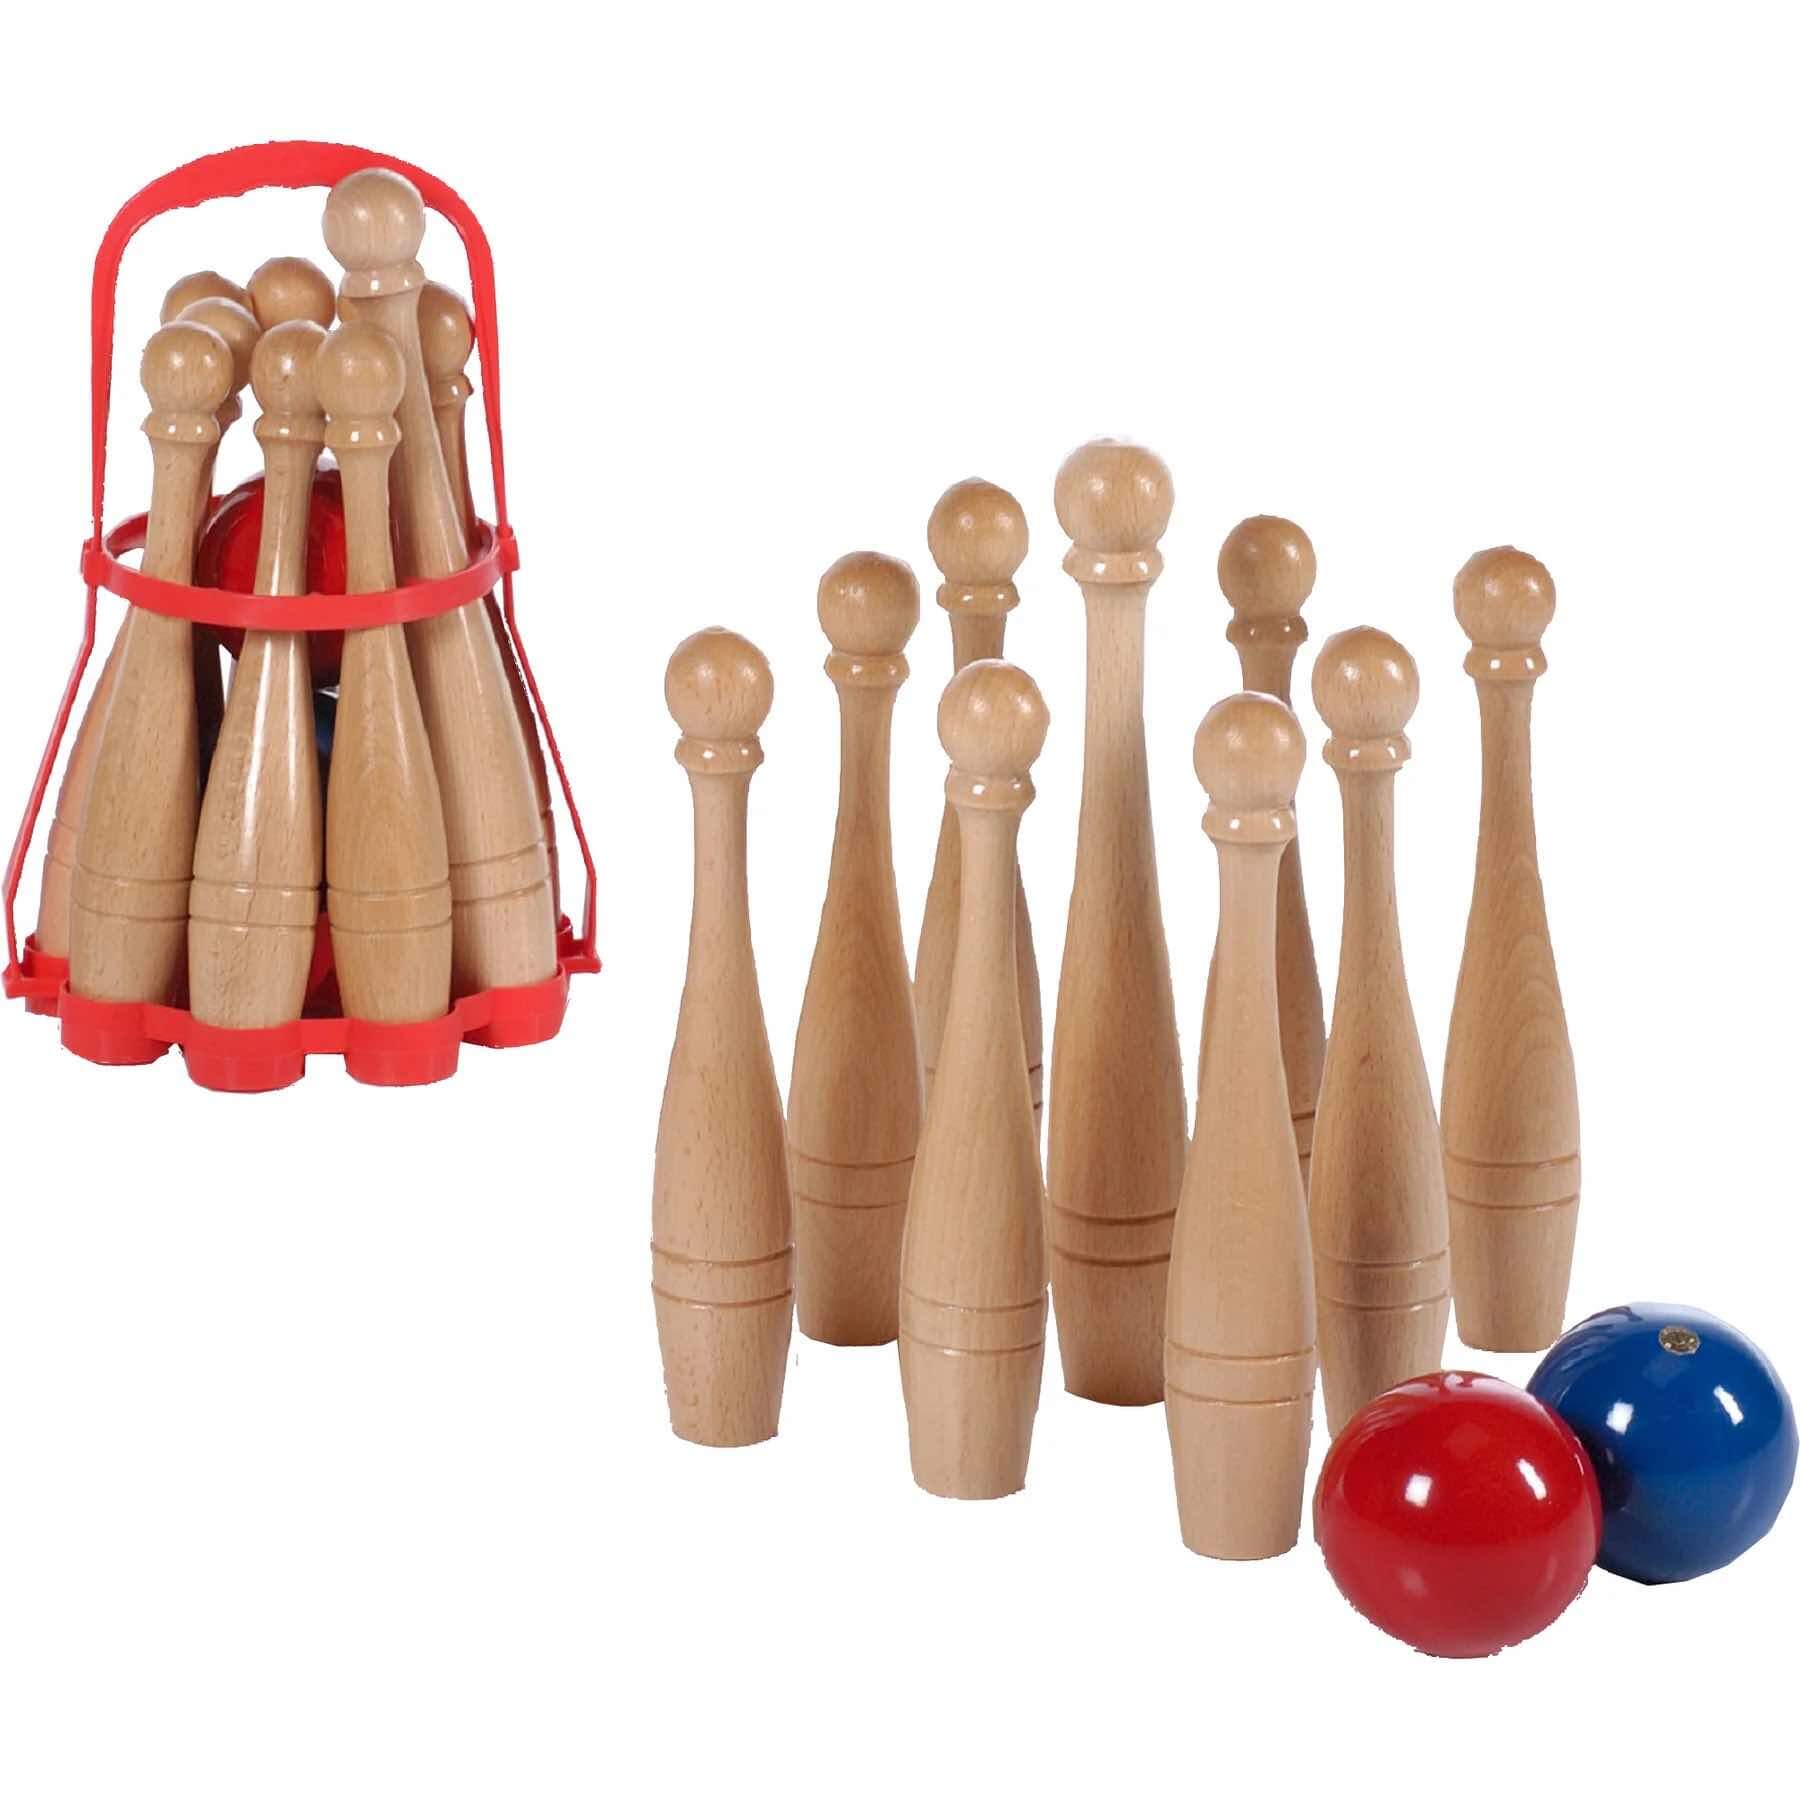 Kettler USA LAWN BOWLING SKITTLES SET, Carrying Basket, 10-03111PH, Made In Italy